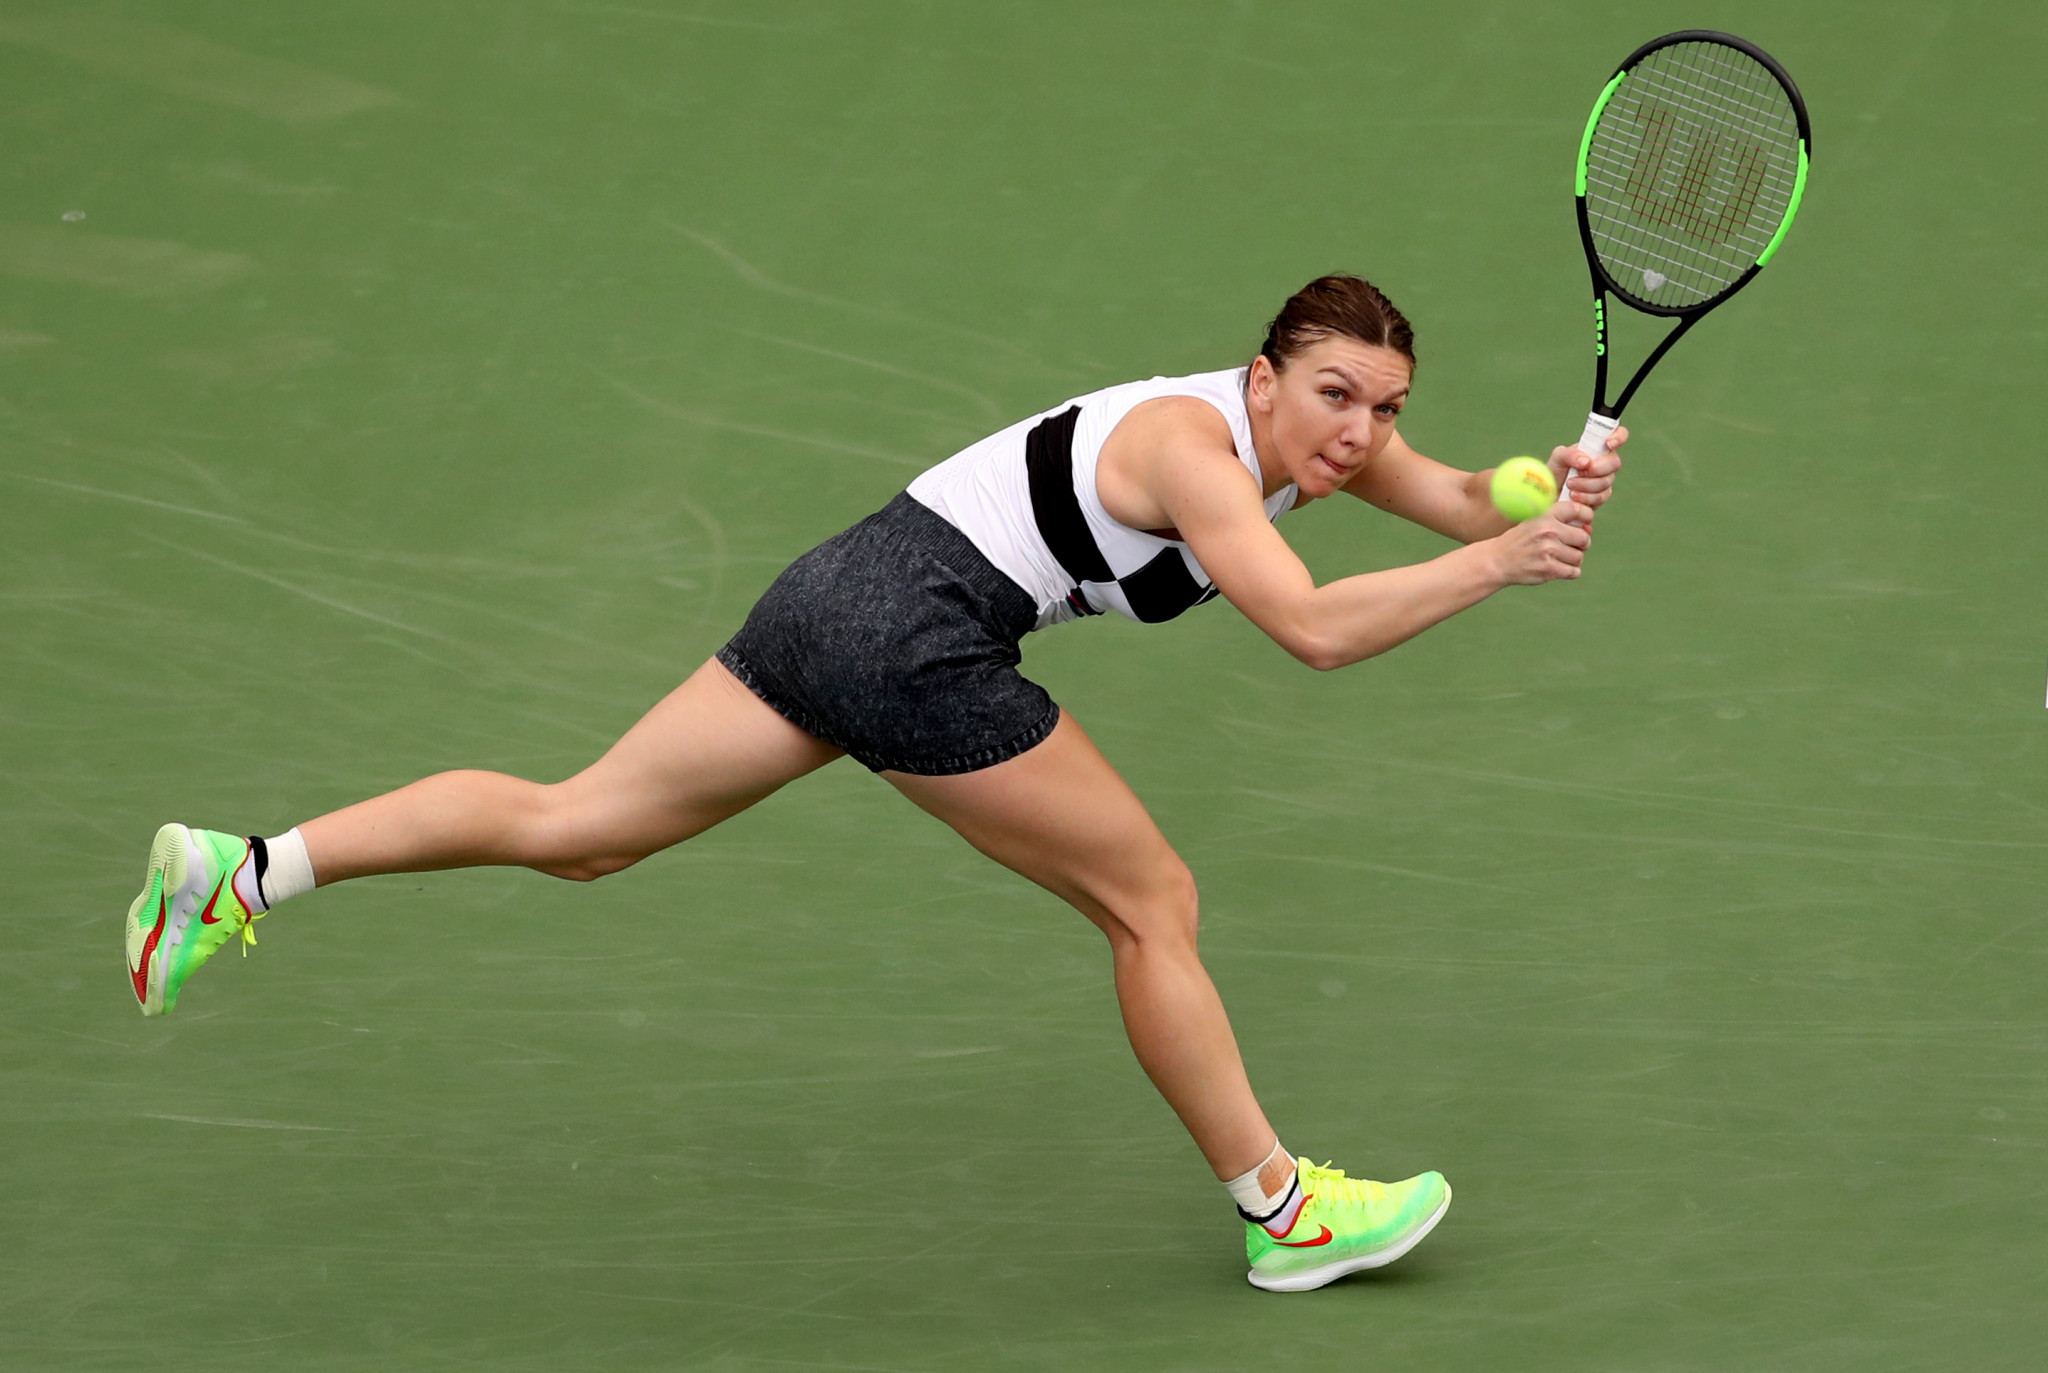 Simona Halep progressed to the third round of the tournament ©Getty Images